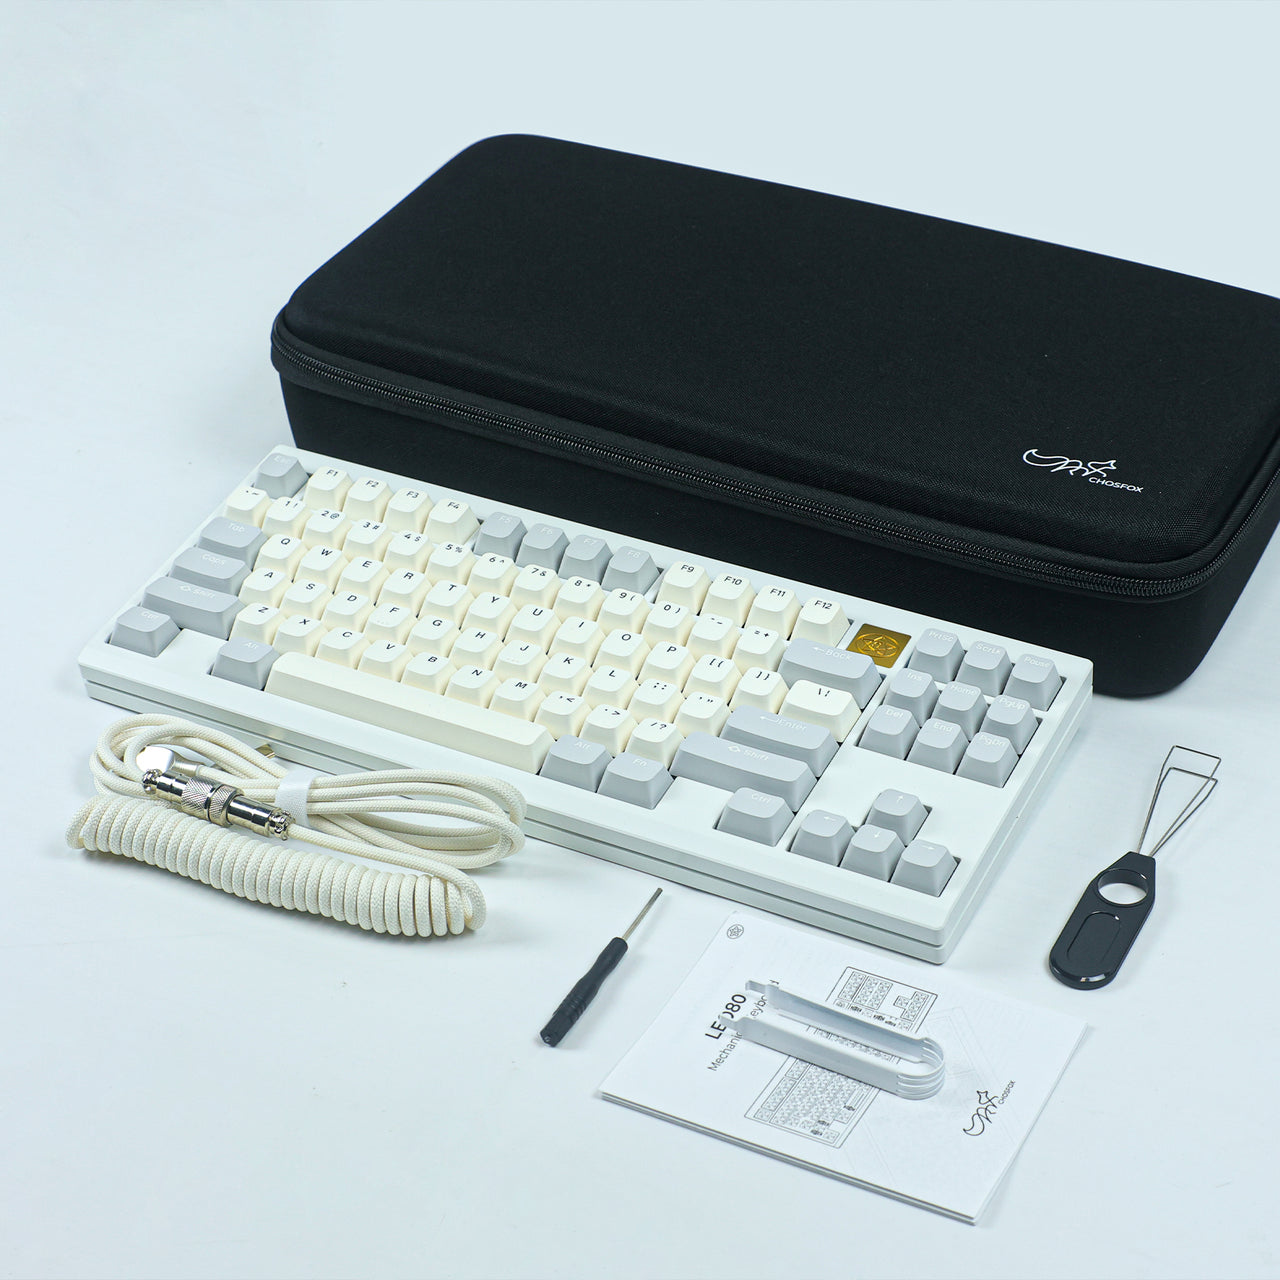 Leo80 prebuilt keyboard with carry case and accessories